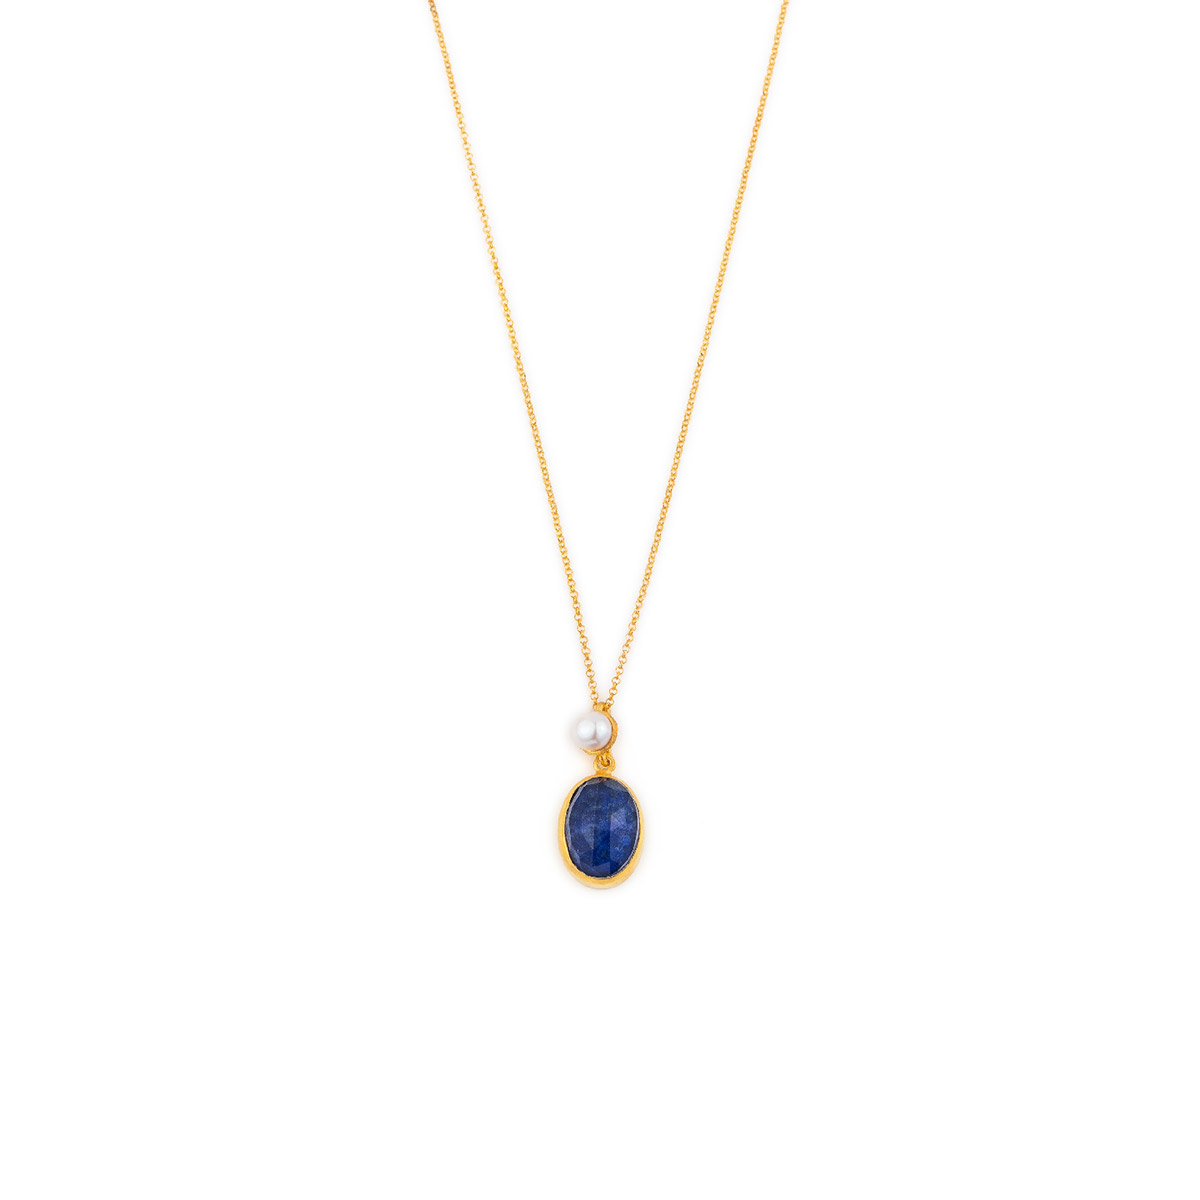 Lapis Lazuli Doublet Necklace - Sterling Silver and Gold Plated